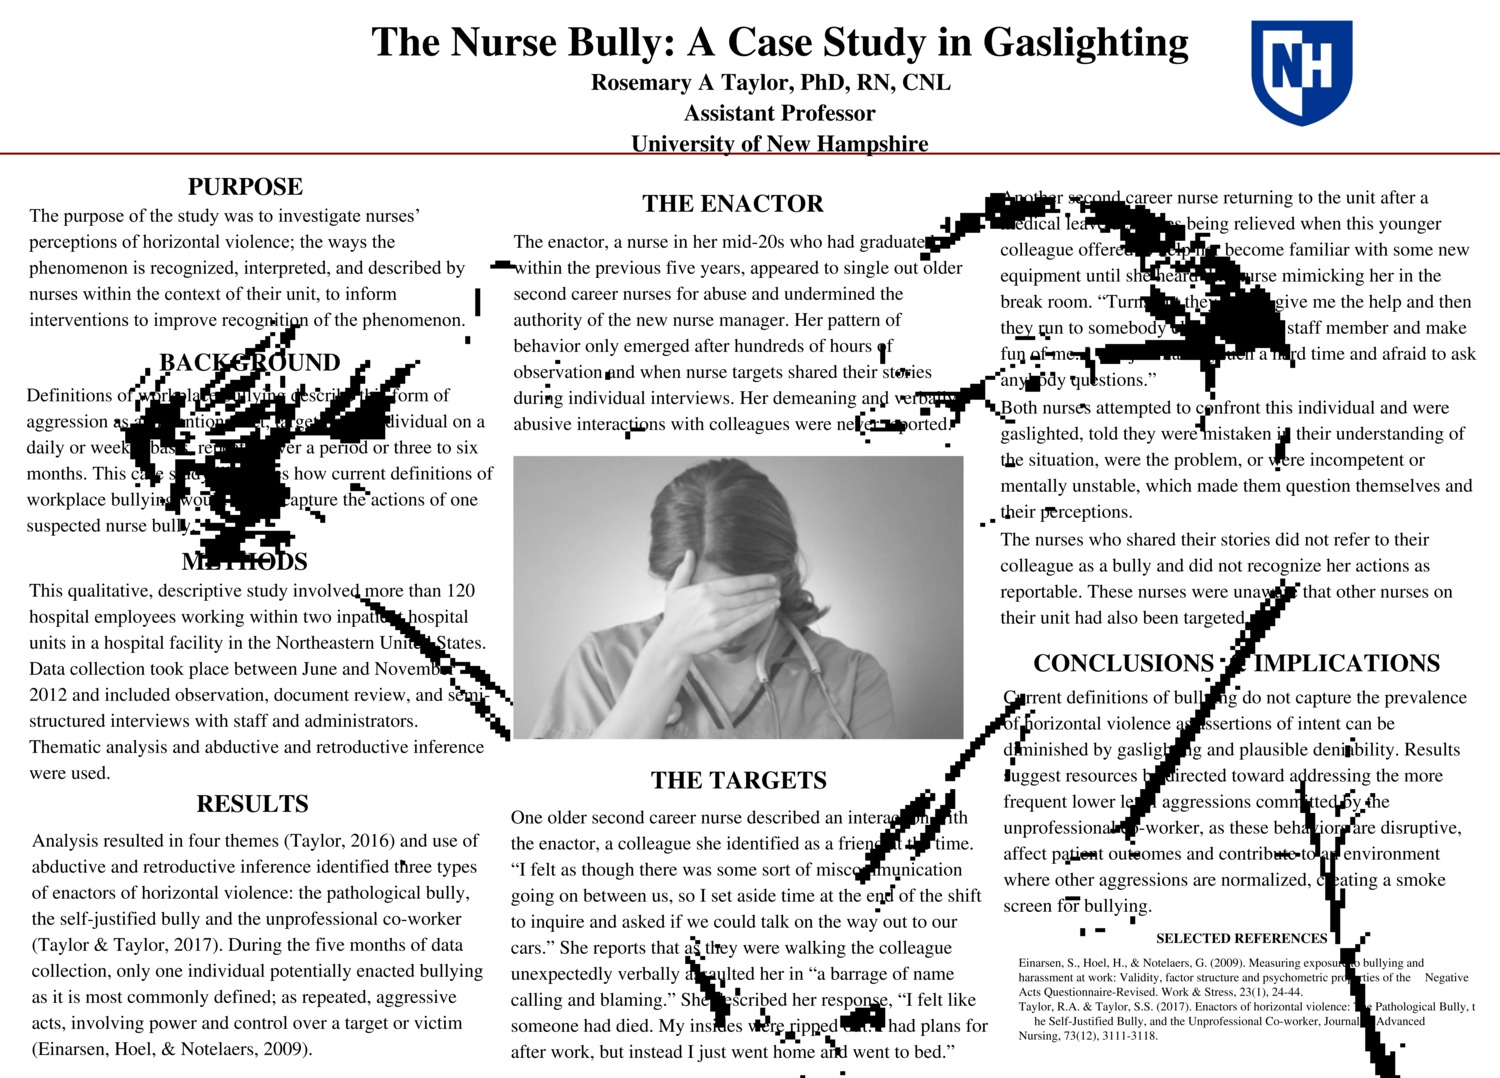 The Nurse Bully: A Case Study In Gaslighting by rt1007